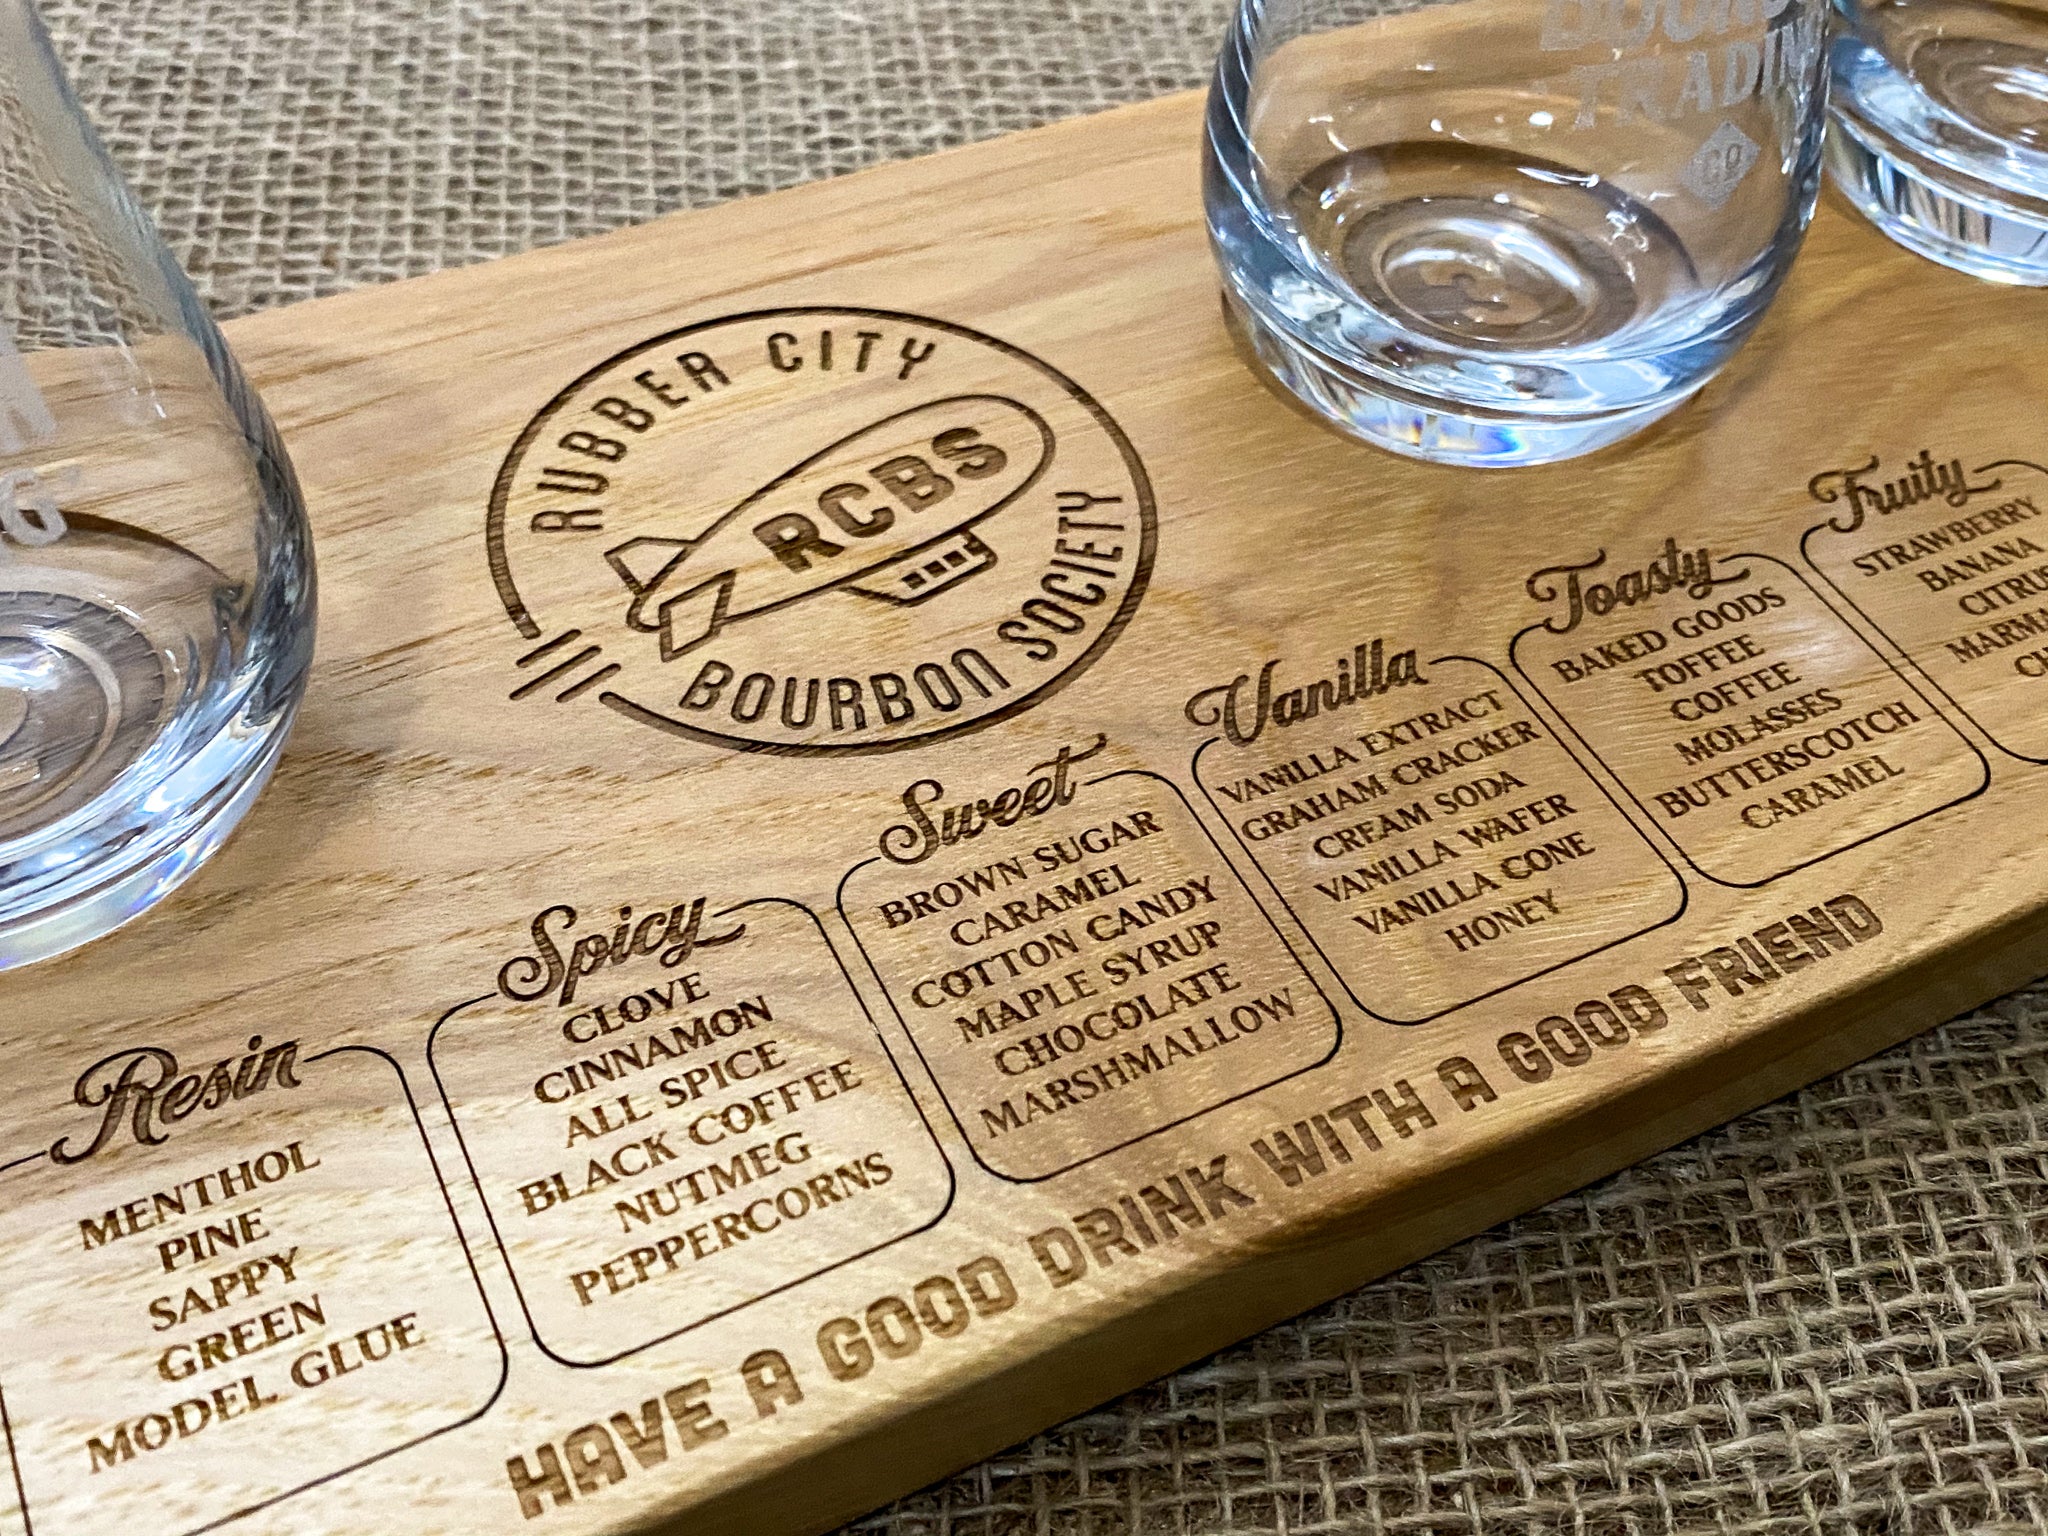 MEMBERS ONLY: RCBS Hickory Flight Board